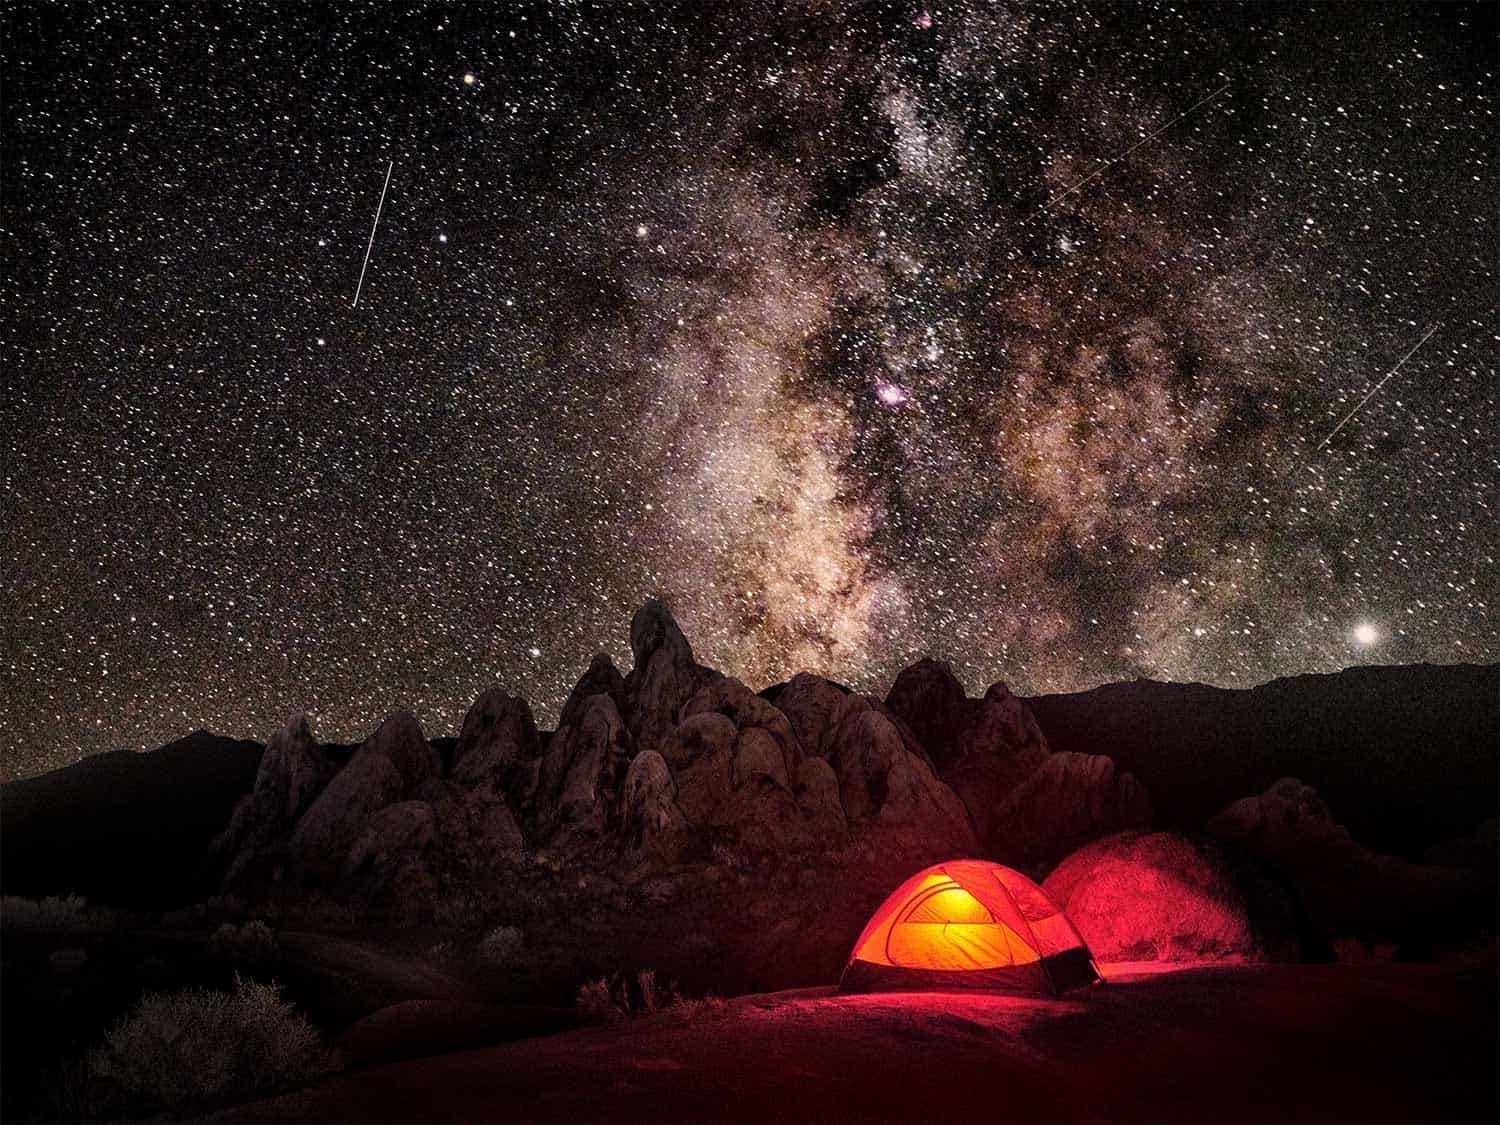 REI Half Dome 2 backpacking tent at night lit up against a starry sky